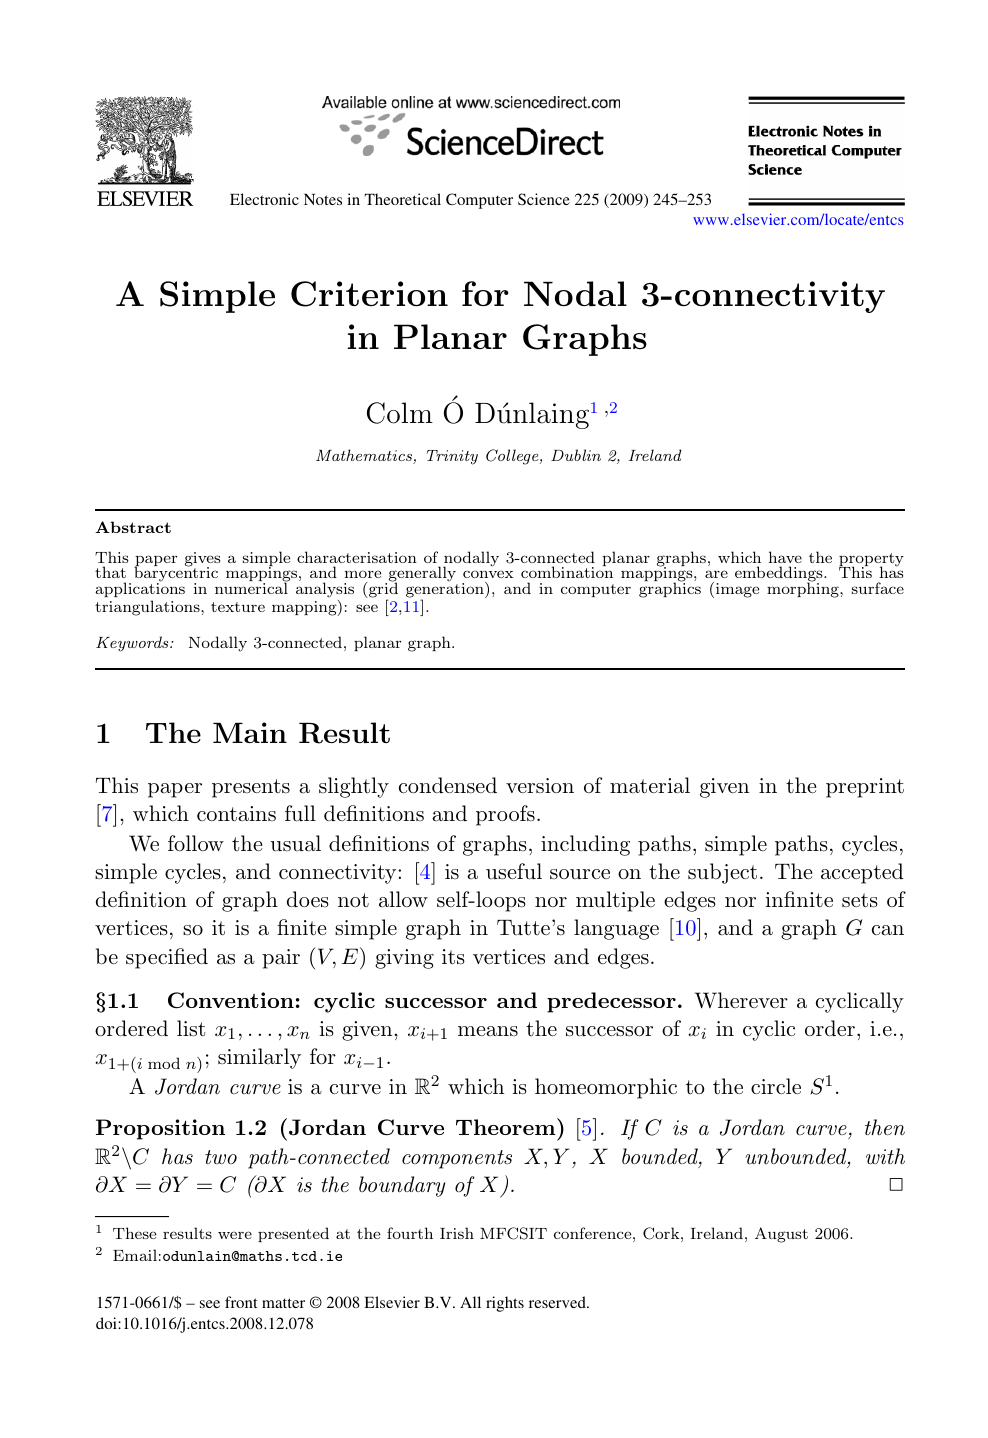 A Simple Criterion For Nodal 3 Connectivity In Planar Graphs Topic Of Research Paper In Computer And Information Sciences Download Scholarly Article Pdf And Read For Free On Cyberleninka Open Science Hub